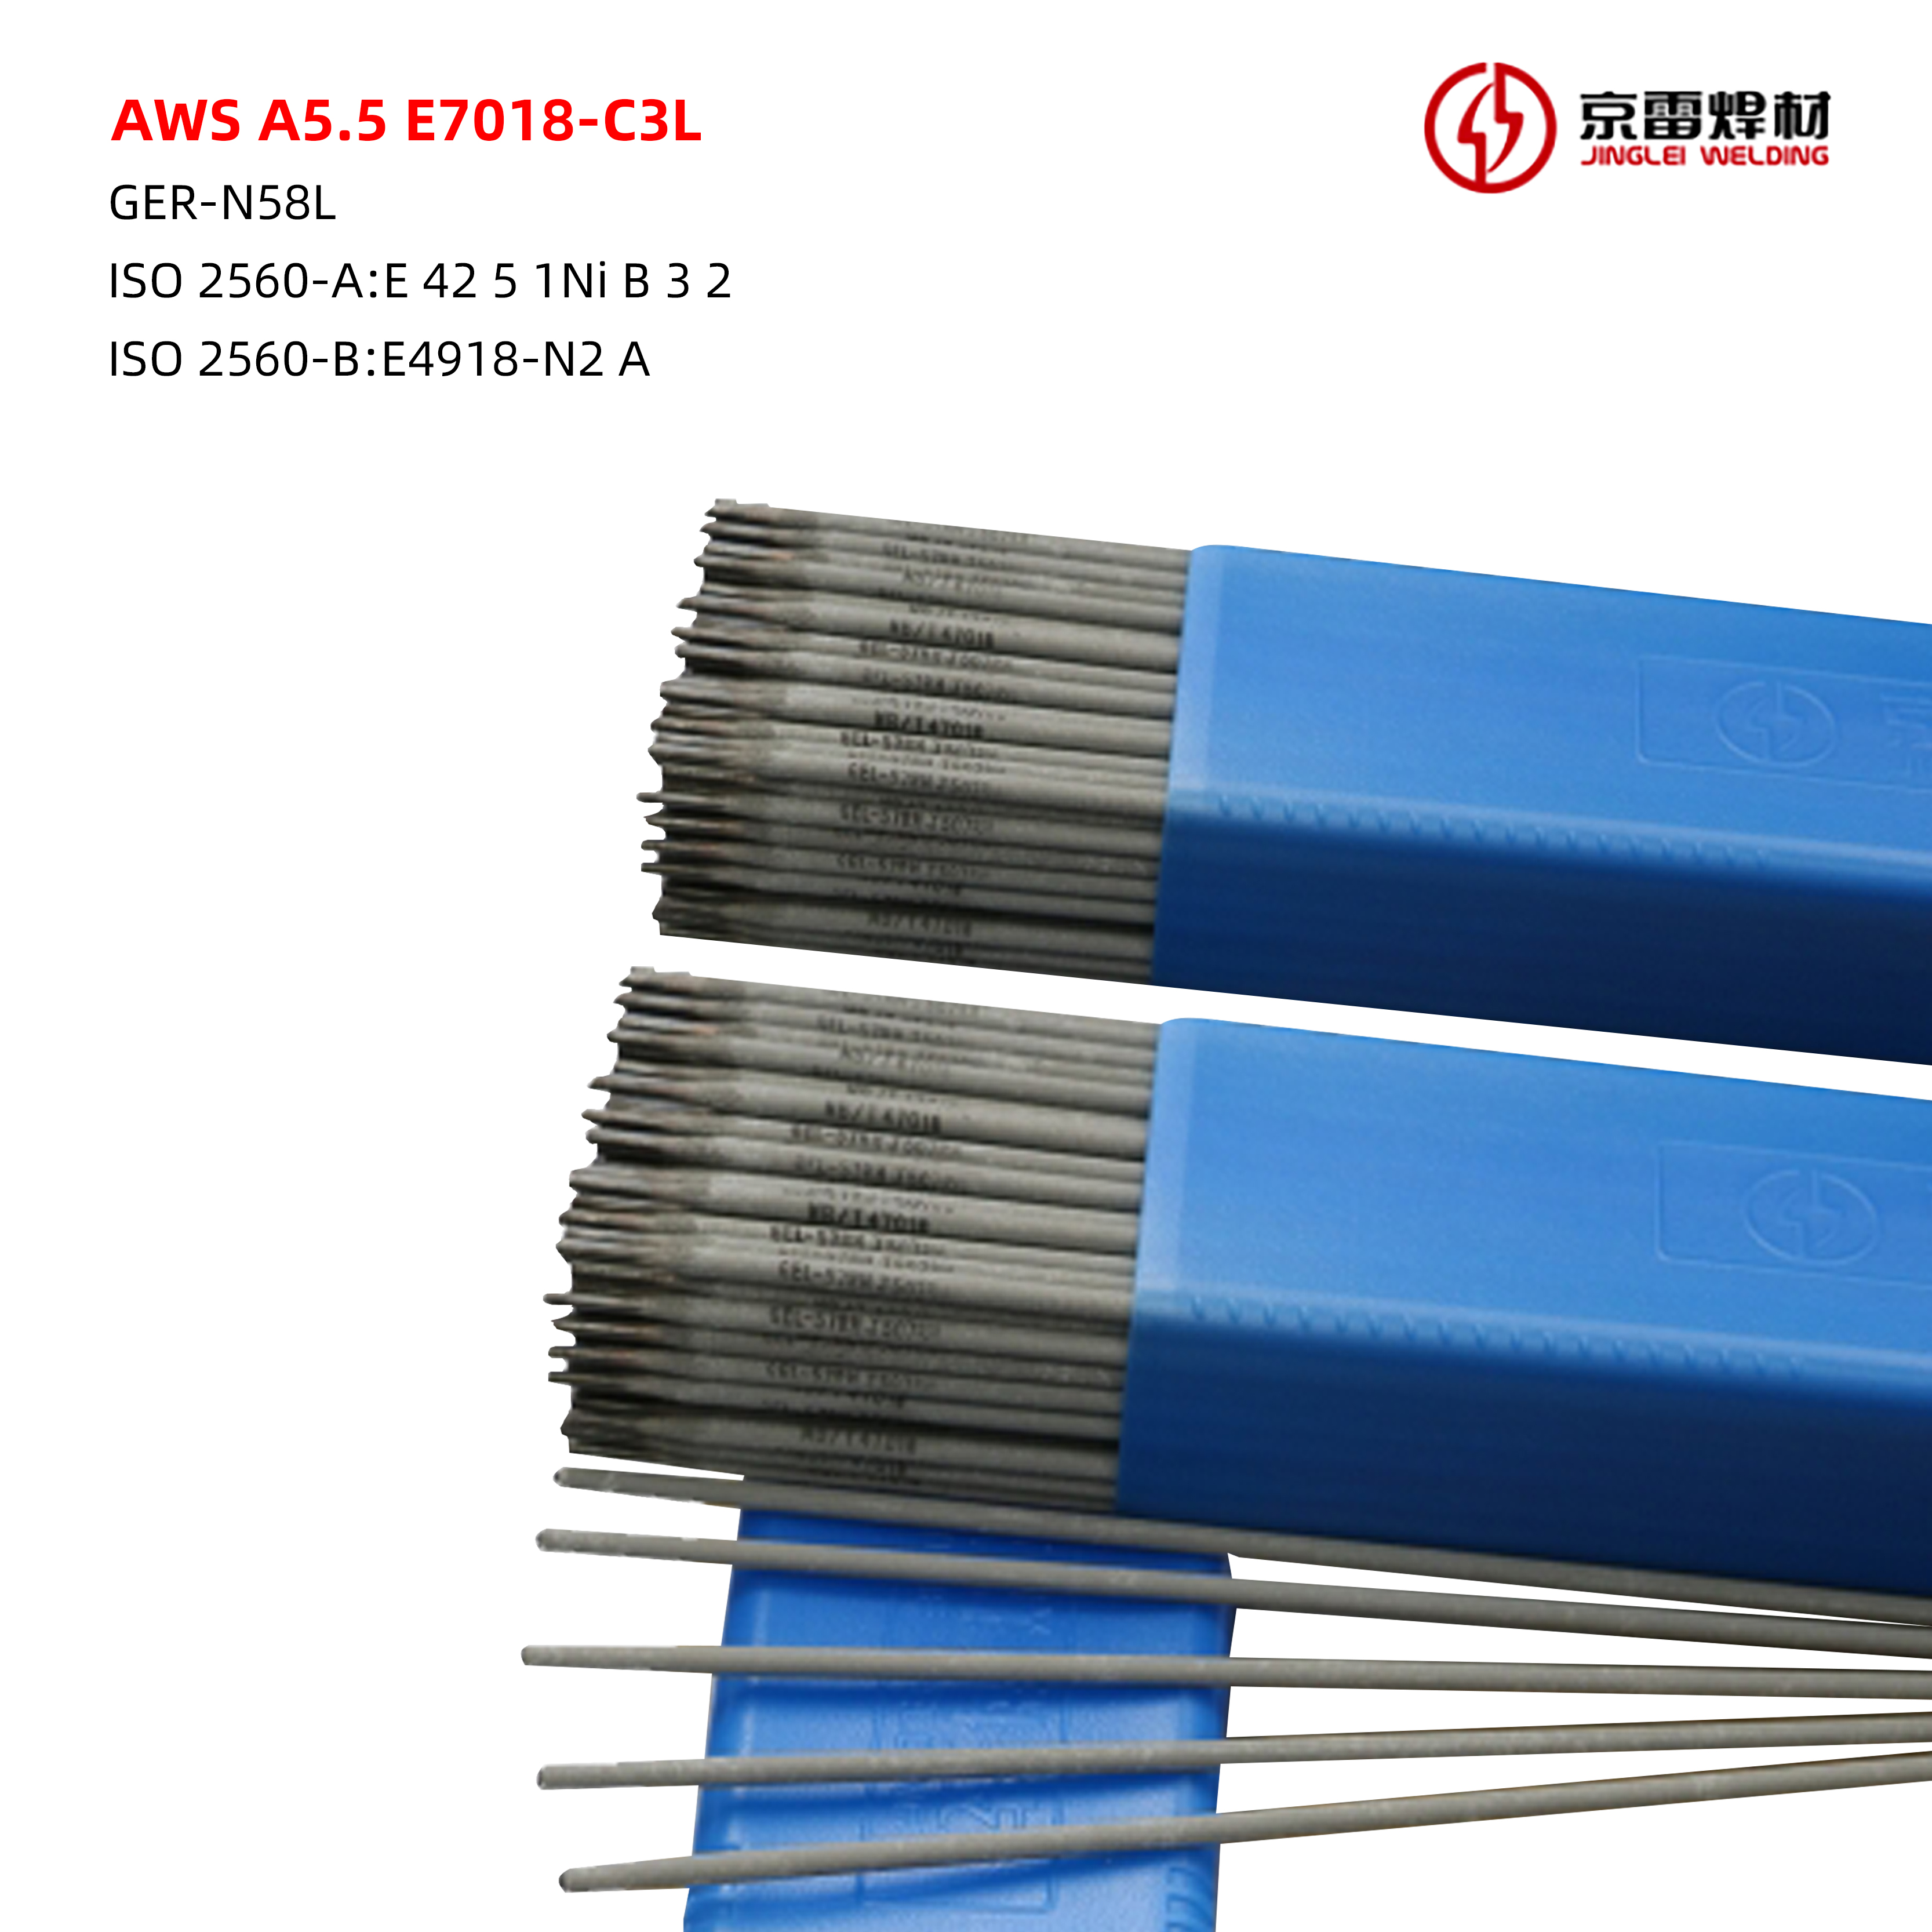 Low-Alloy Steels Manual Electrode E7018-C3L Three 2 # Passive soldering